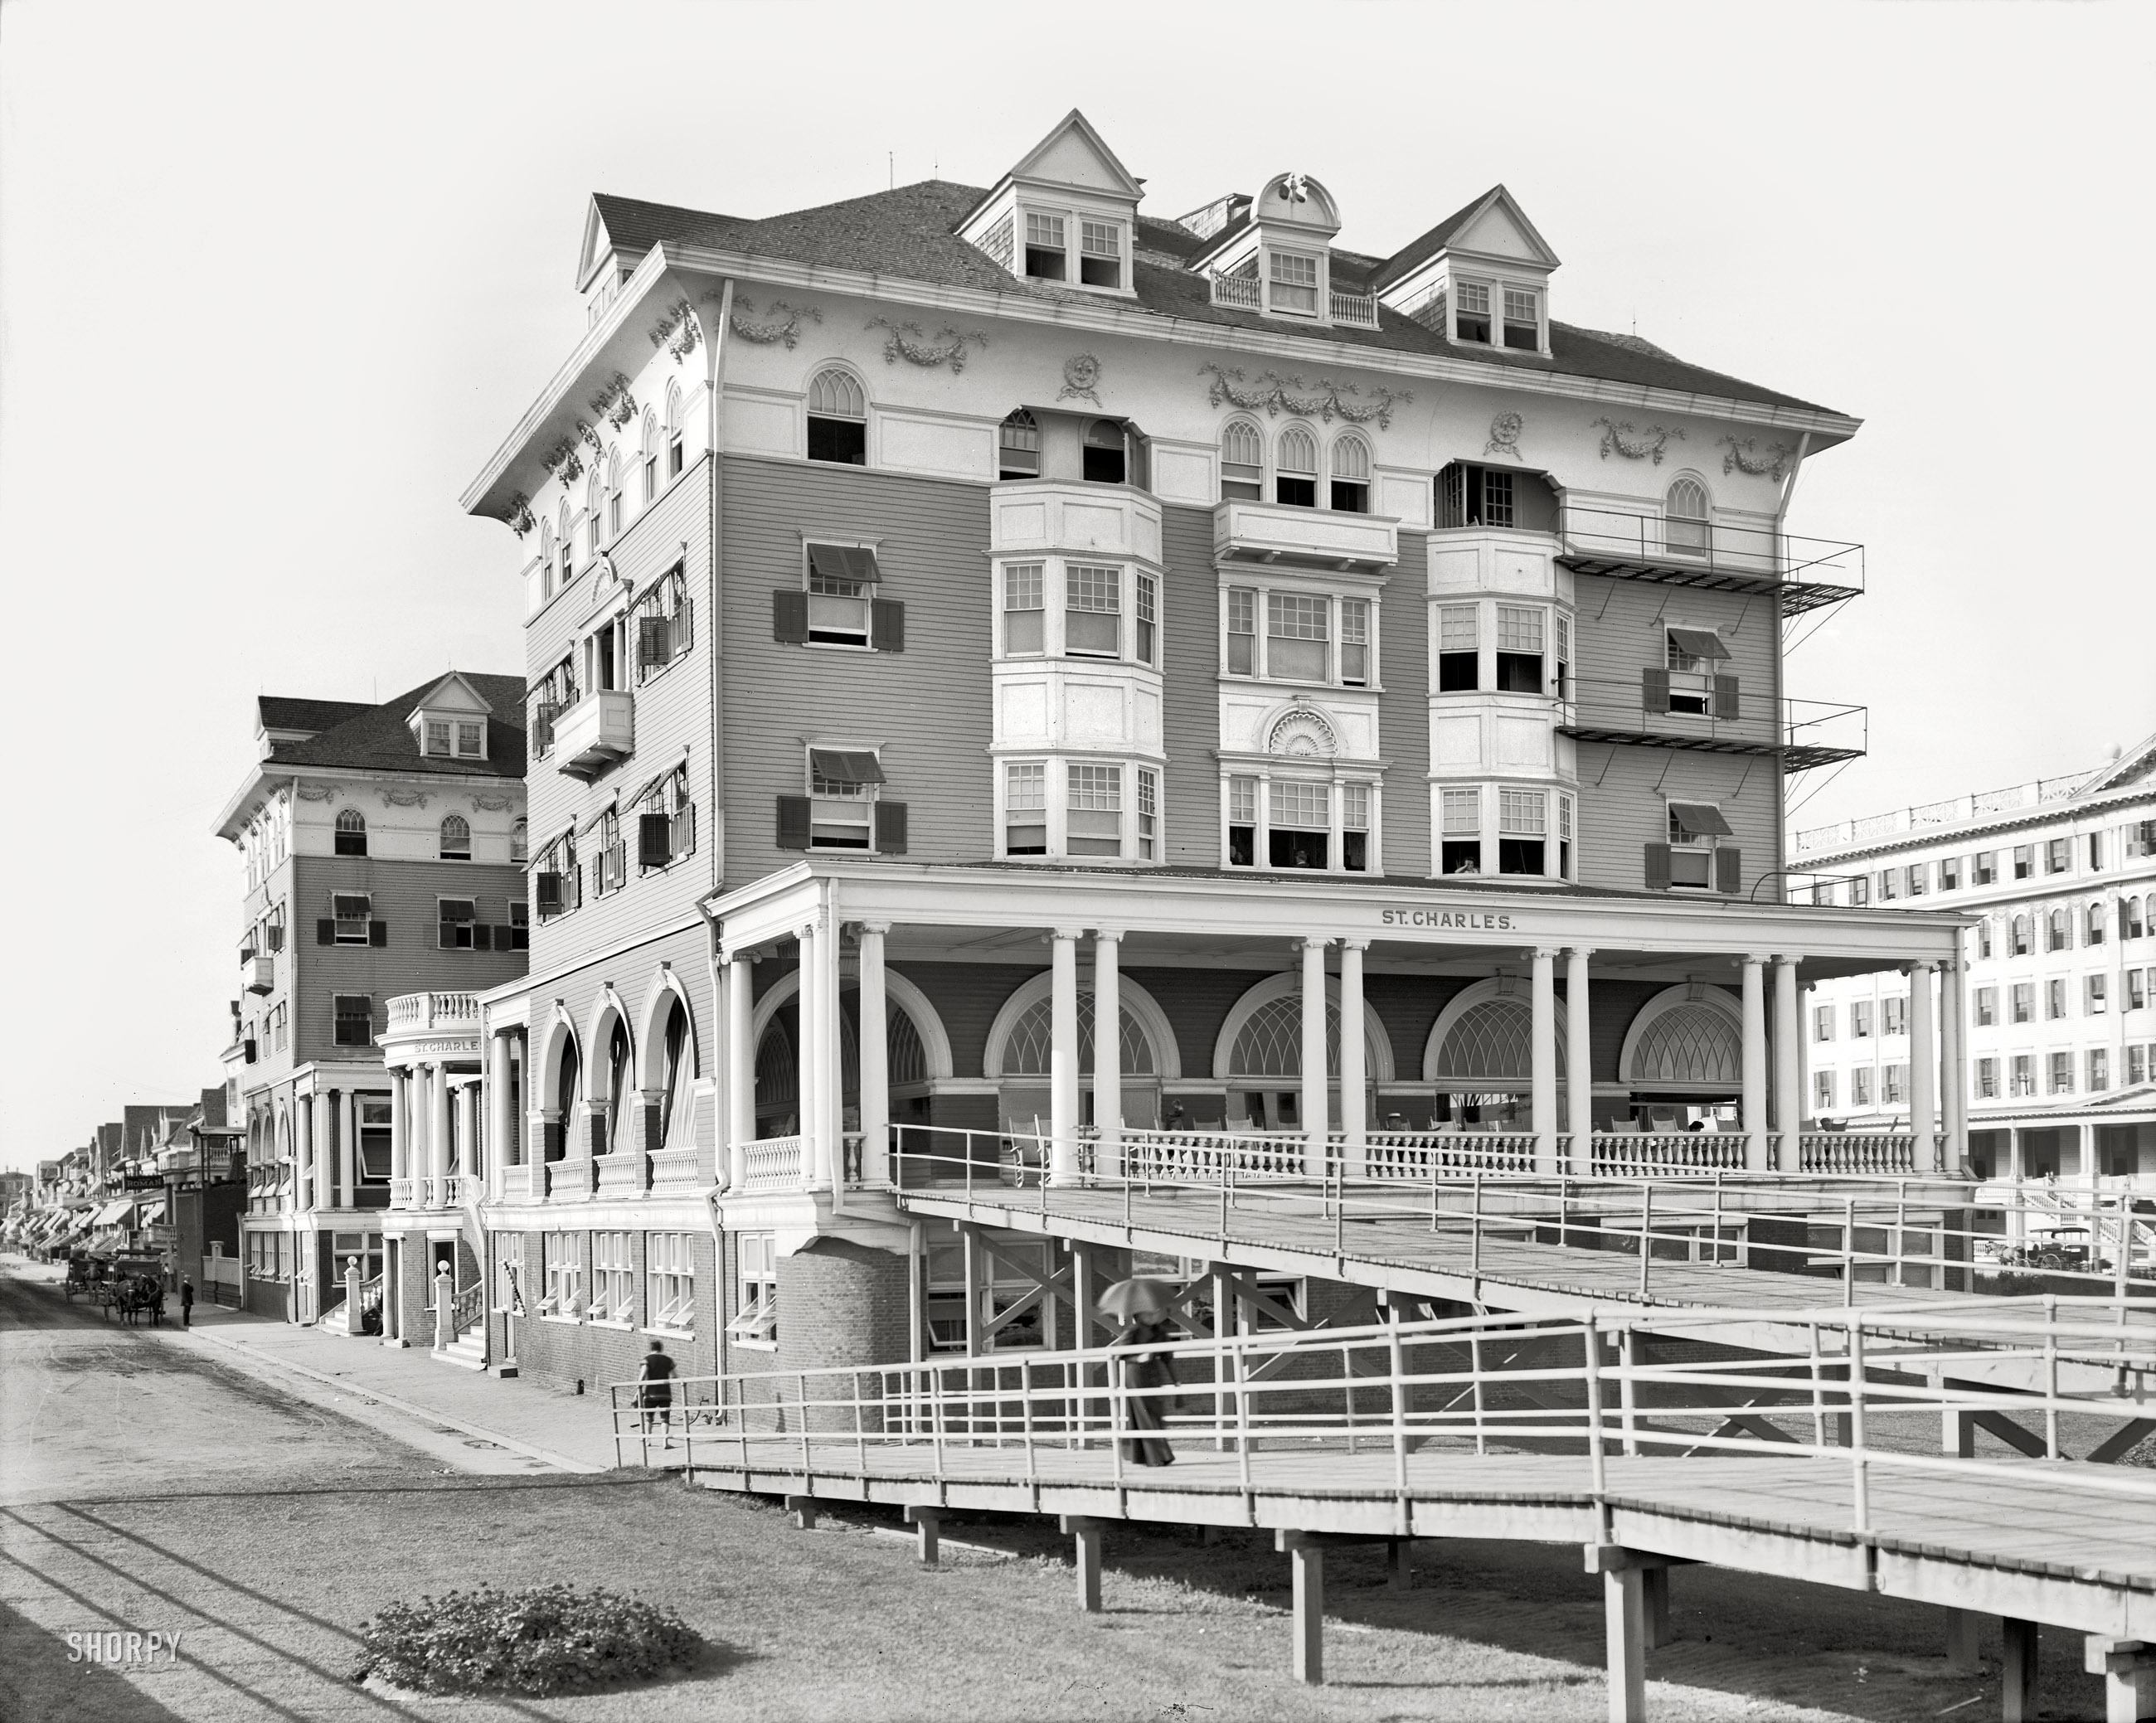 Atlantic City, New Jersey, circa 1910. "Hotel St. Charles." It's getting to be that time of year again -- the season for bathing-costumes, salt air and Boardwalk rolling chairs. 8x10 glass negative, Detroit Publishing Co. View full size.